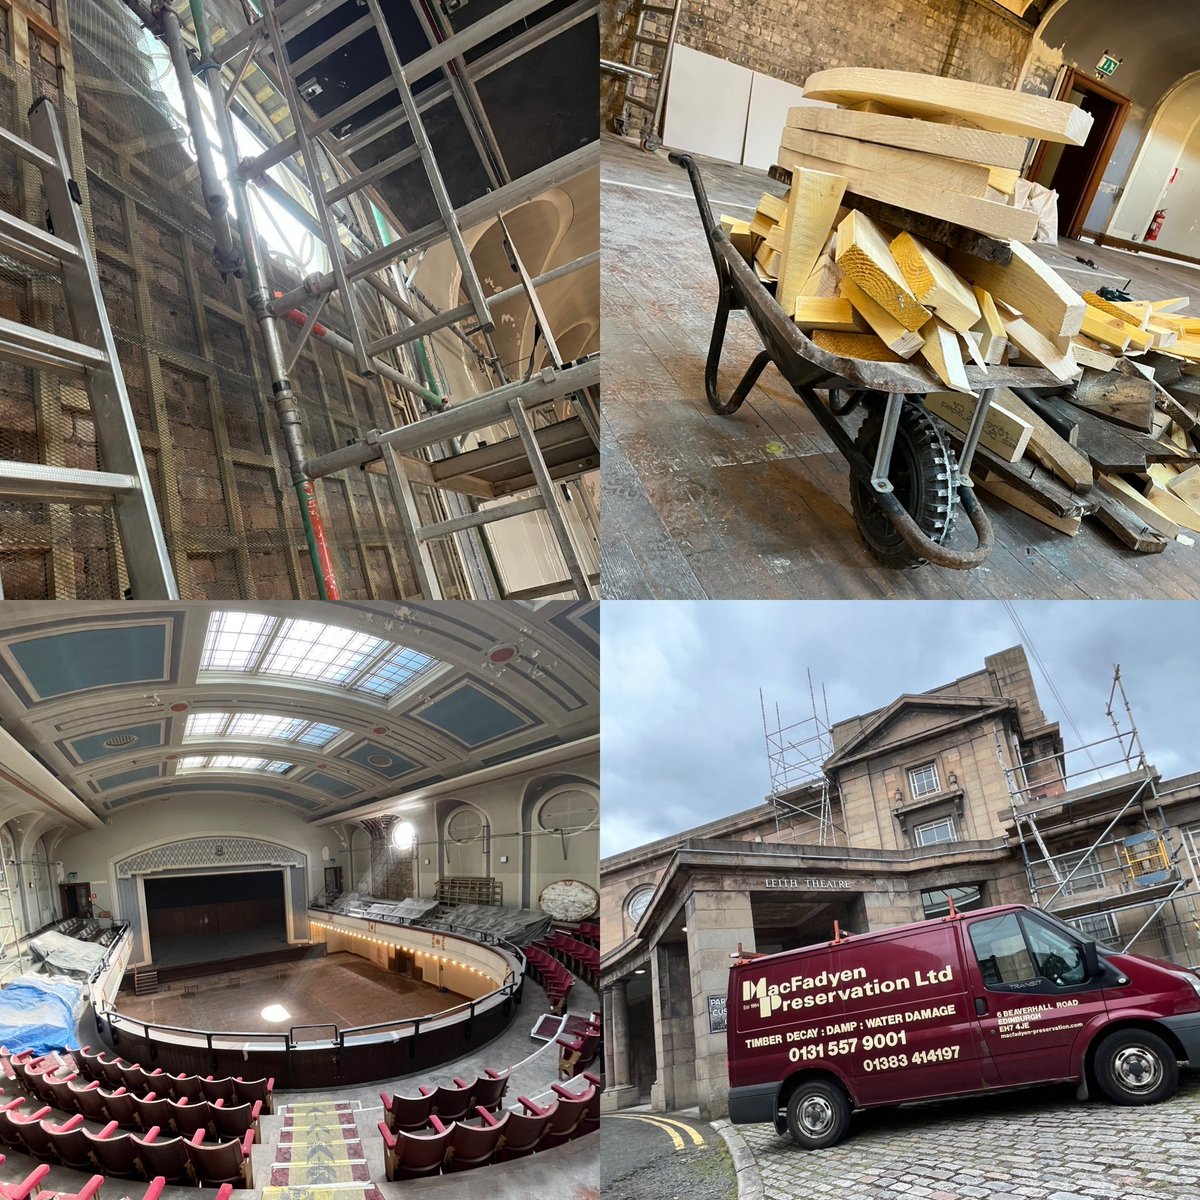 As August in the city motors on, so does the progress at Leith Theatre; it's just a bit more preservation than performance for us. But it's all very exciting, nonetheless! 🛠️💙